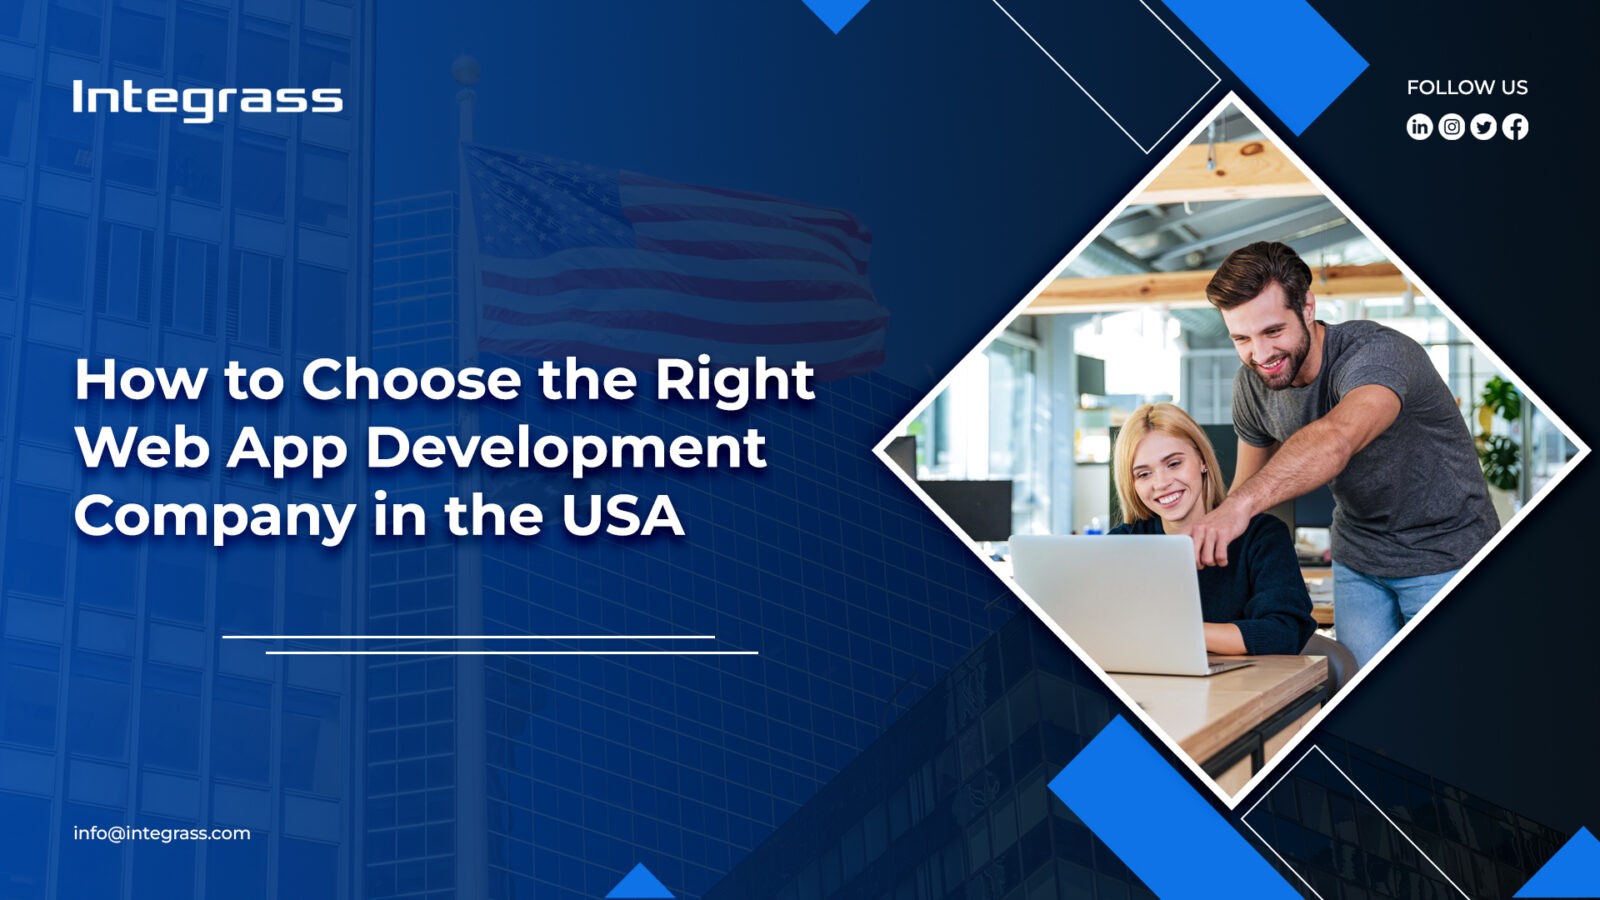 An IT professional pointing at a laptop showing something to a woman colleague and the text on the left reads "How to Choose the Right Web Development Company in the USA"